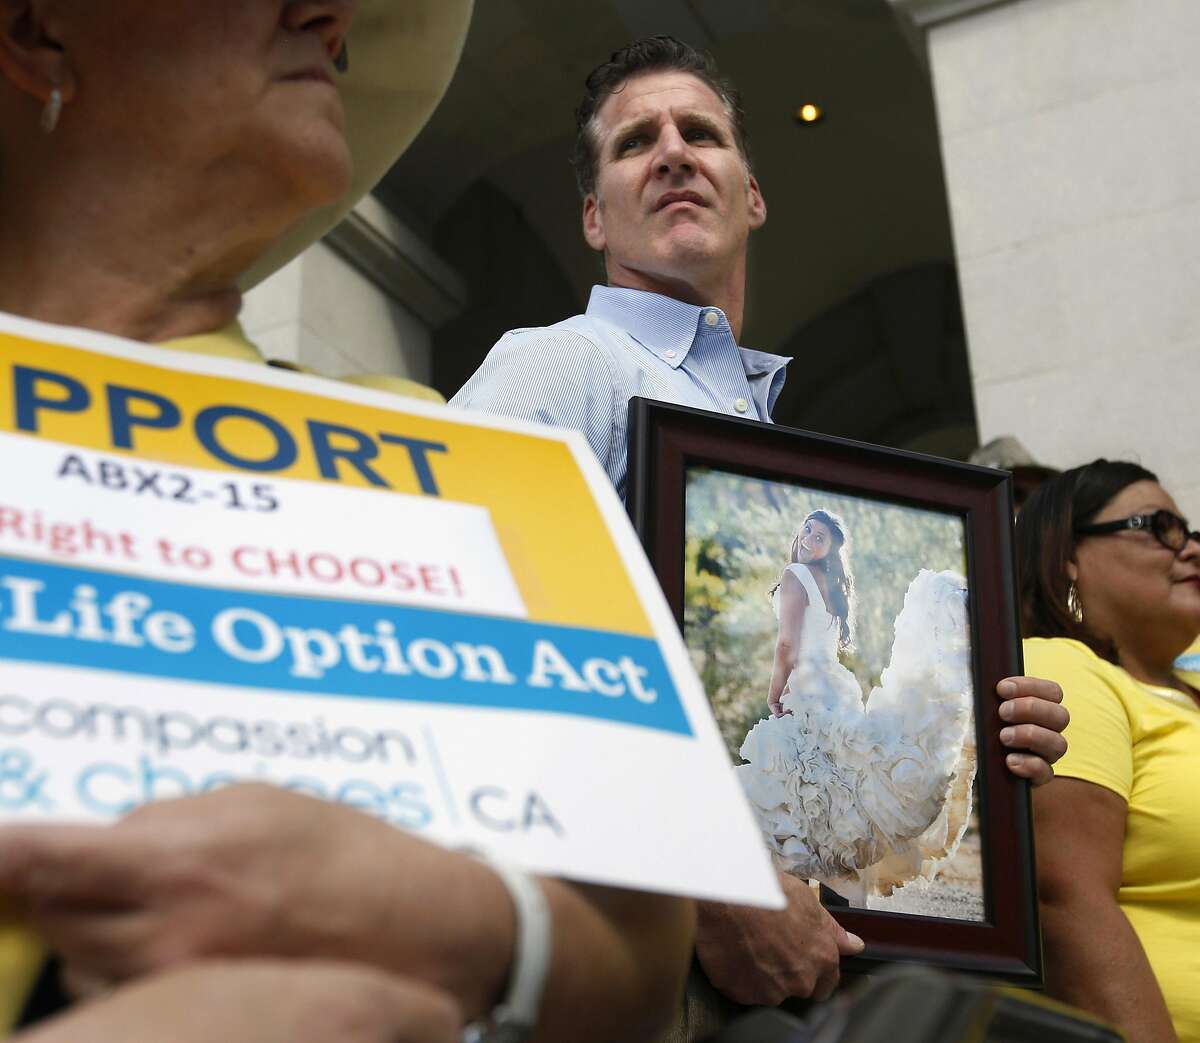 Dan Diaz holds a photo of his late wife, Brittany Maynard during a rally calling for California Gov. Jerry Brown to sign the right to die legislation at the Capitol in Sacramento, Calif., Thursday, Sept. 24, 2015. Maynard was the 29-year-old California woman with brain cancer who moved to Oregon to legally end her life. The measure, approved by both houses of the Legislature, faces an uncertain future with Brown, a former Jesuit seminarian who has not said whether he will sign it. (AP Photo/Rich Pedroncelli)